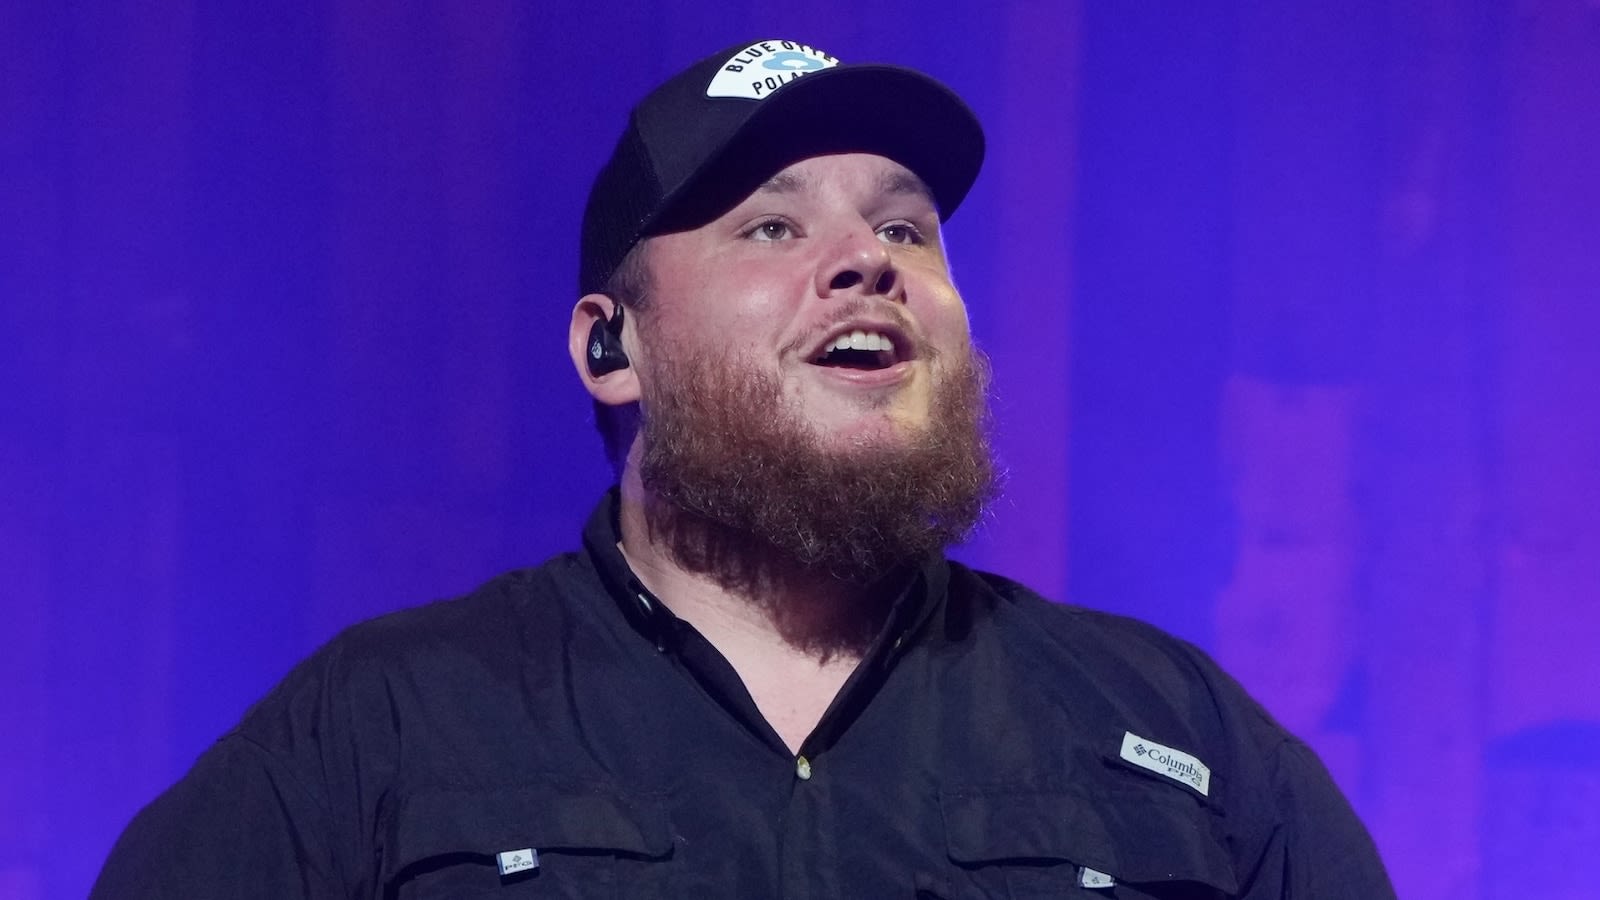 Luke Combs pens heartfelt note to sons Tex and Beau